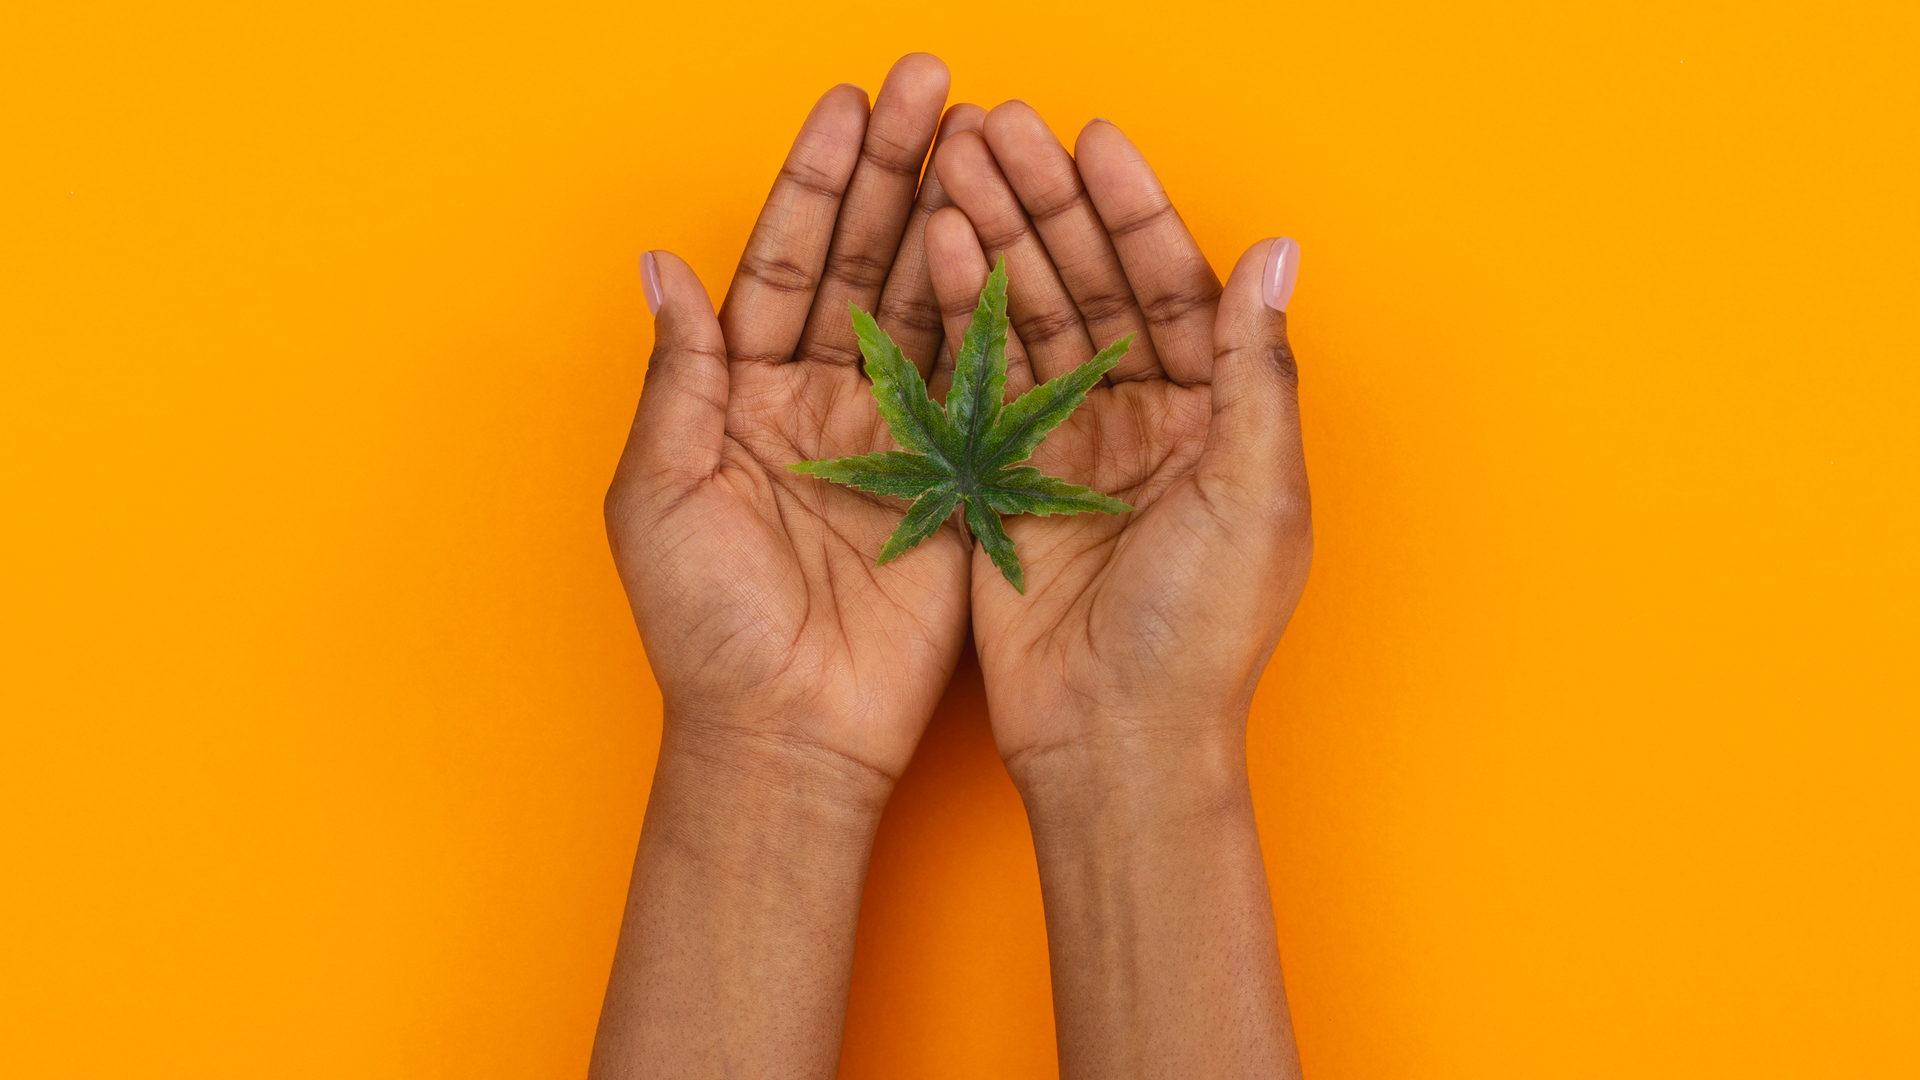 People of colour must be represented across the cannabis industry